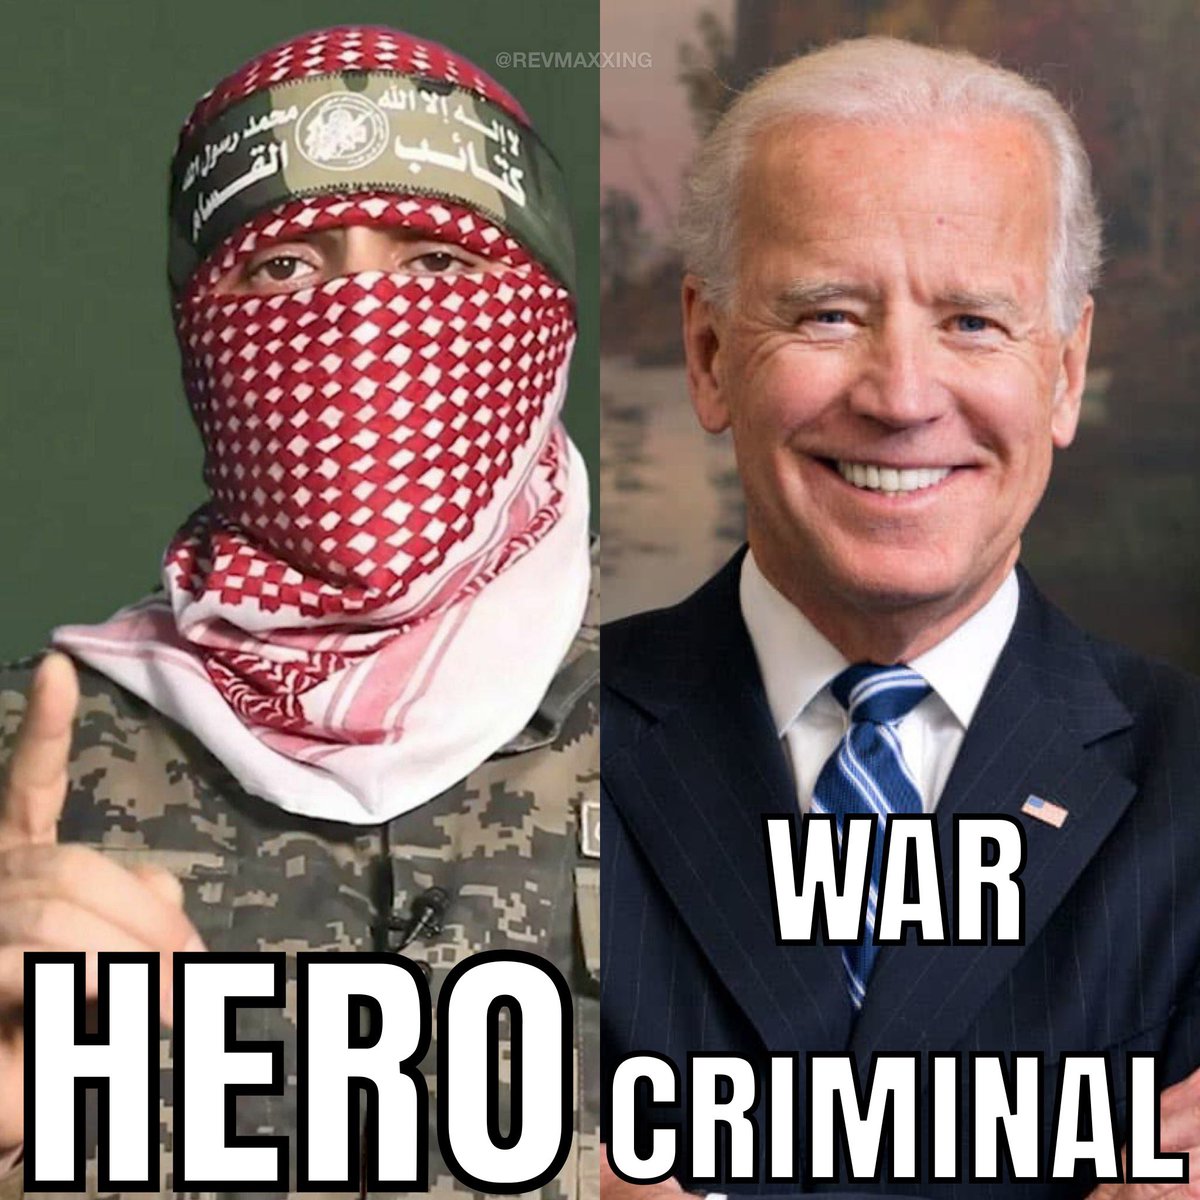 KNOW THE DIFFERENCE! 🇵🇸 The man on the left is a HERO! 🇺🇸 The man on the right is a WAR CRIMINAL!